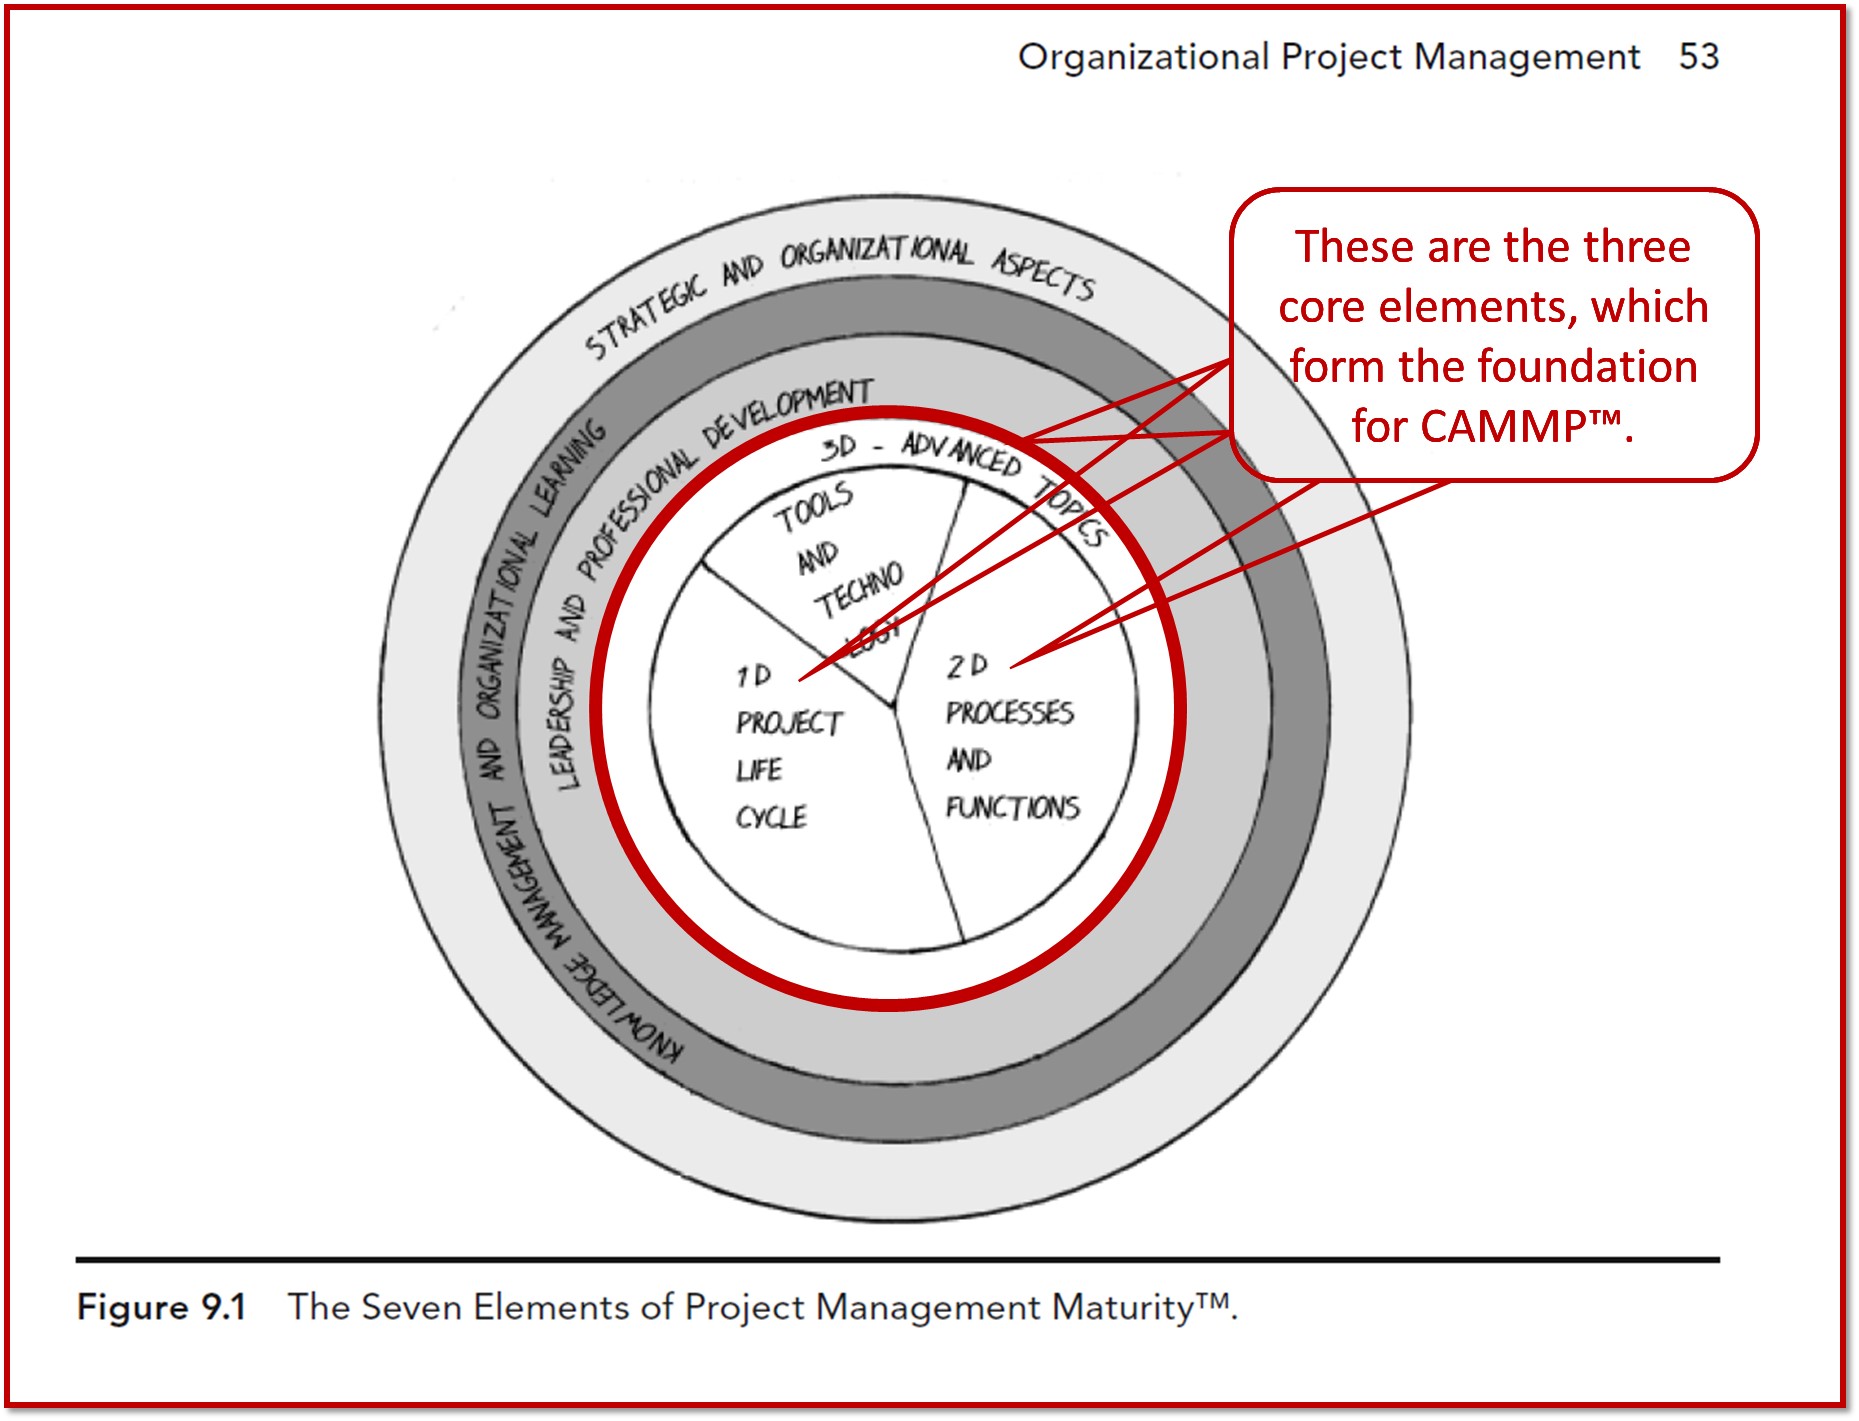 Organizational Project Management; The Seven Elements of Project Management Maturity